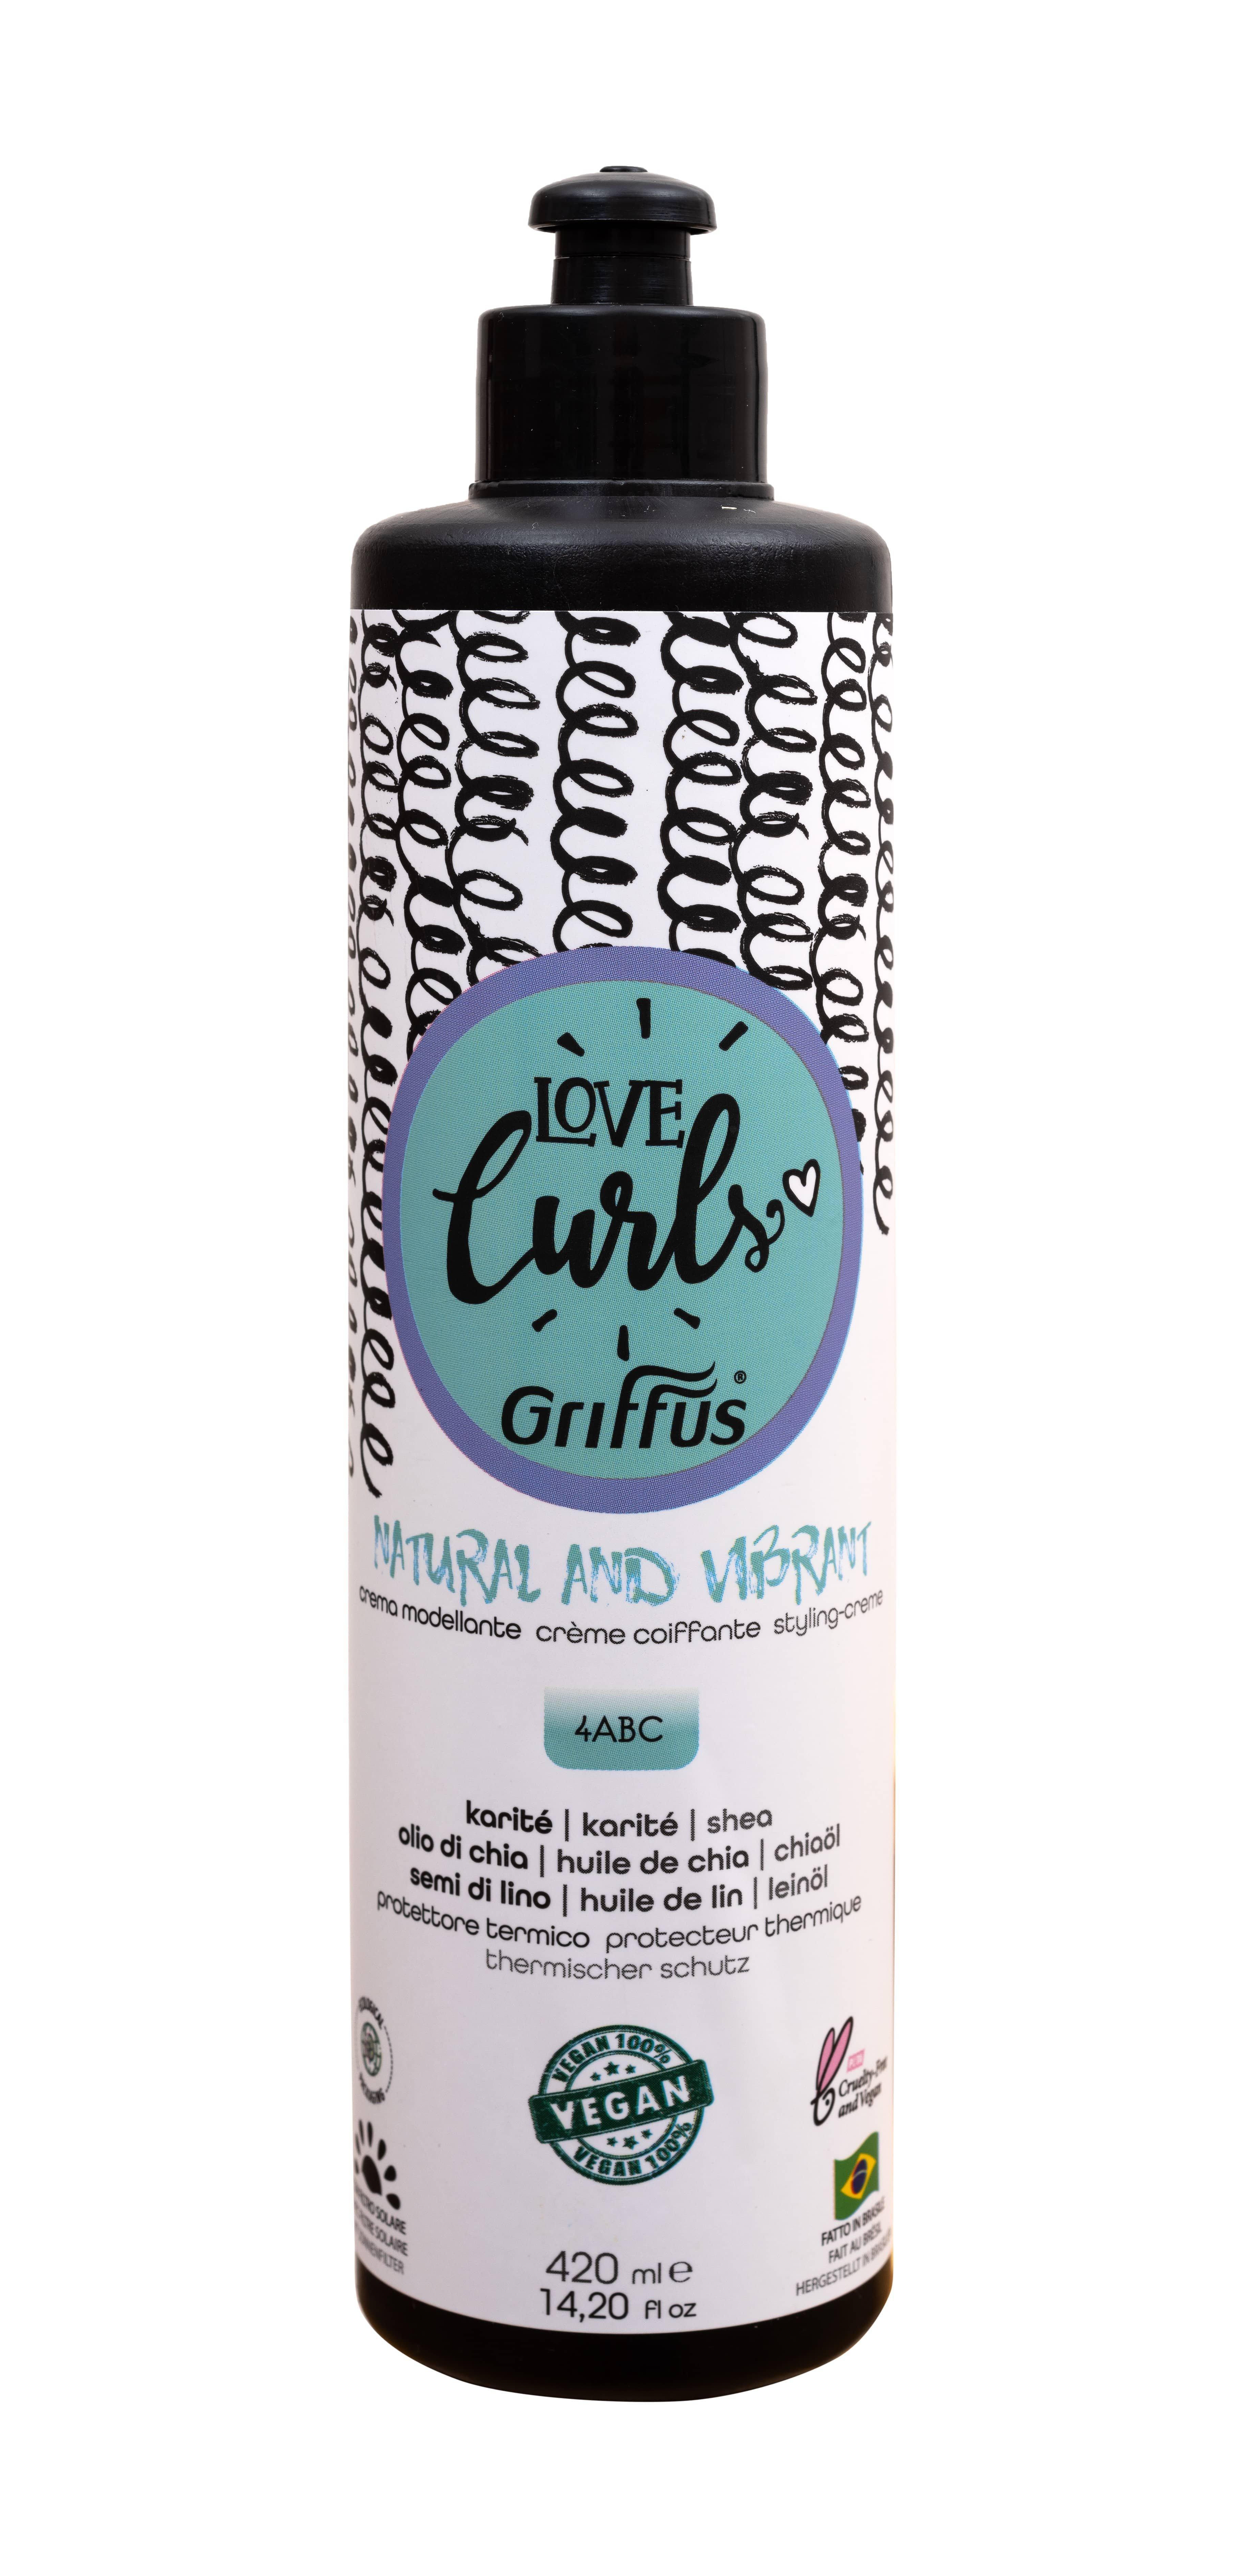 Griffus  Griffus Love Curls Natural & Vibrant Styling Creme 420 ML 4ABC lockiges haar 